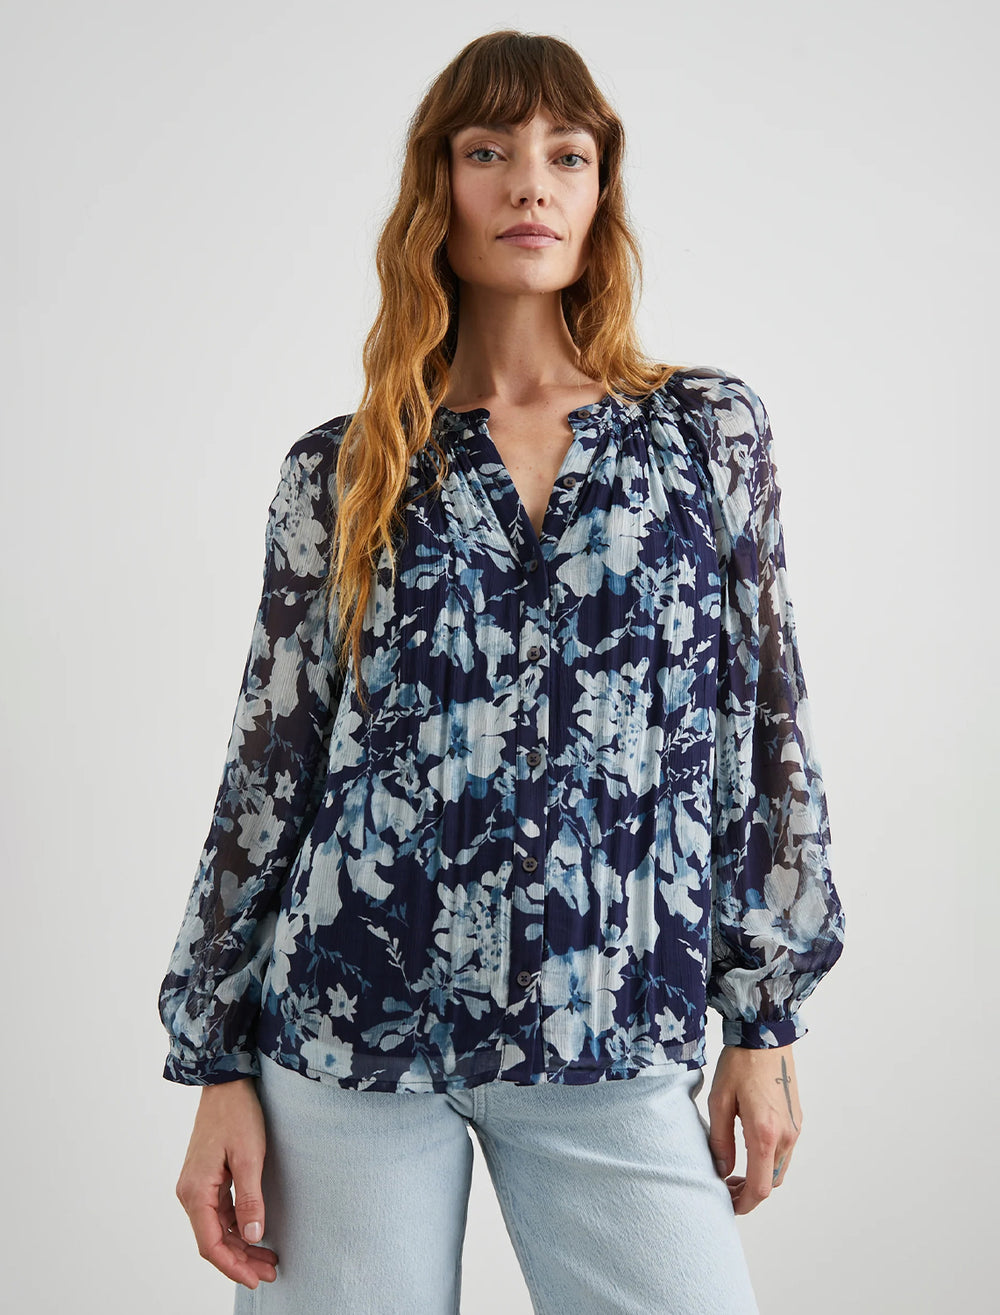 Model wearing Rails' nessie blouse in indigo blossoms.